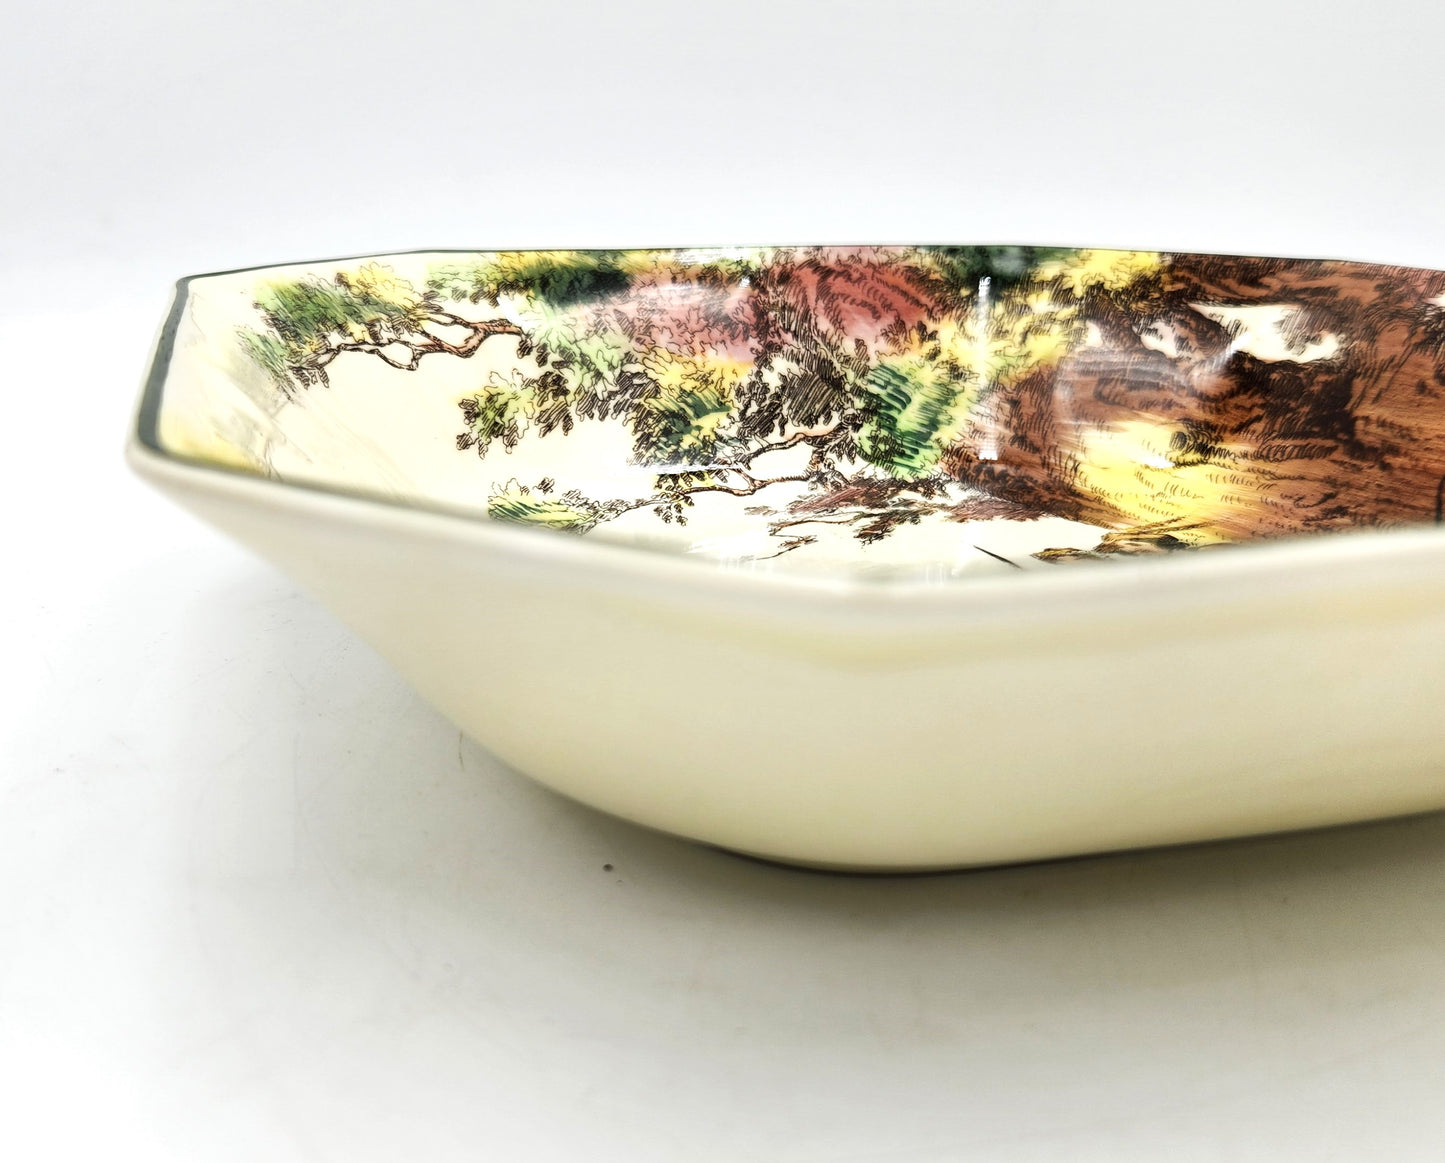 Royal Doulton 'Under the Greenwood Tree' Serving Dish (Square) - 22cm